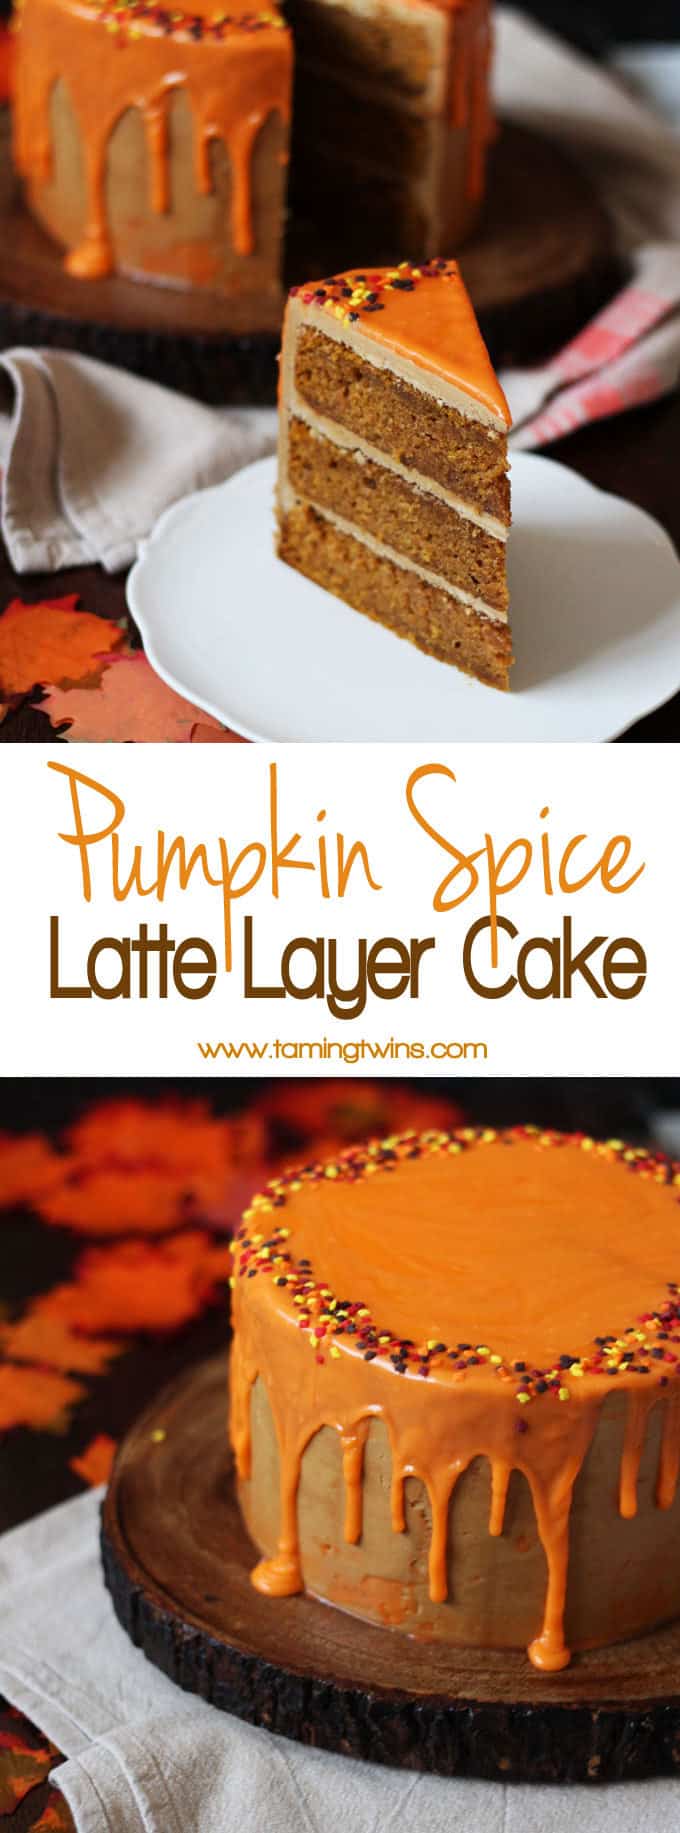 THE Pumpkin Spice Latte Cake Recipe - layers of soft pumpkin spiced cake, with fluffy latte coffee buttercream frosting and a white chocolate ganache icing drizzle. The best Autumn (or fall!) cake. Here's how to make a Pumpkin Spice Latte Layer Cake!